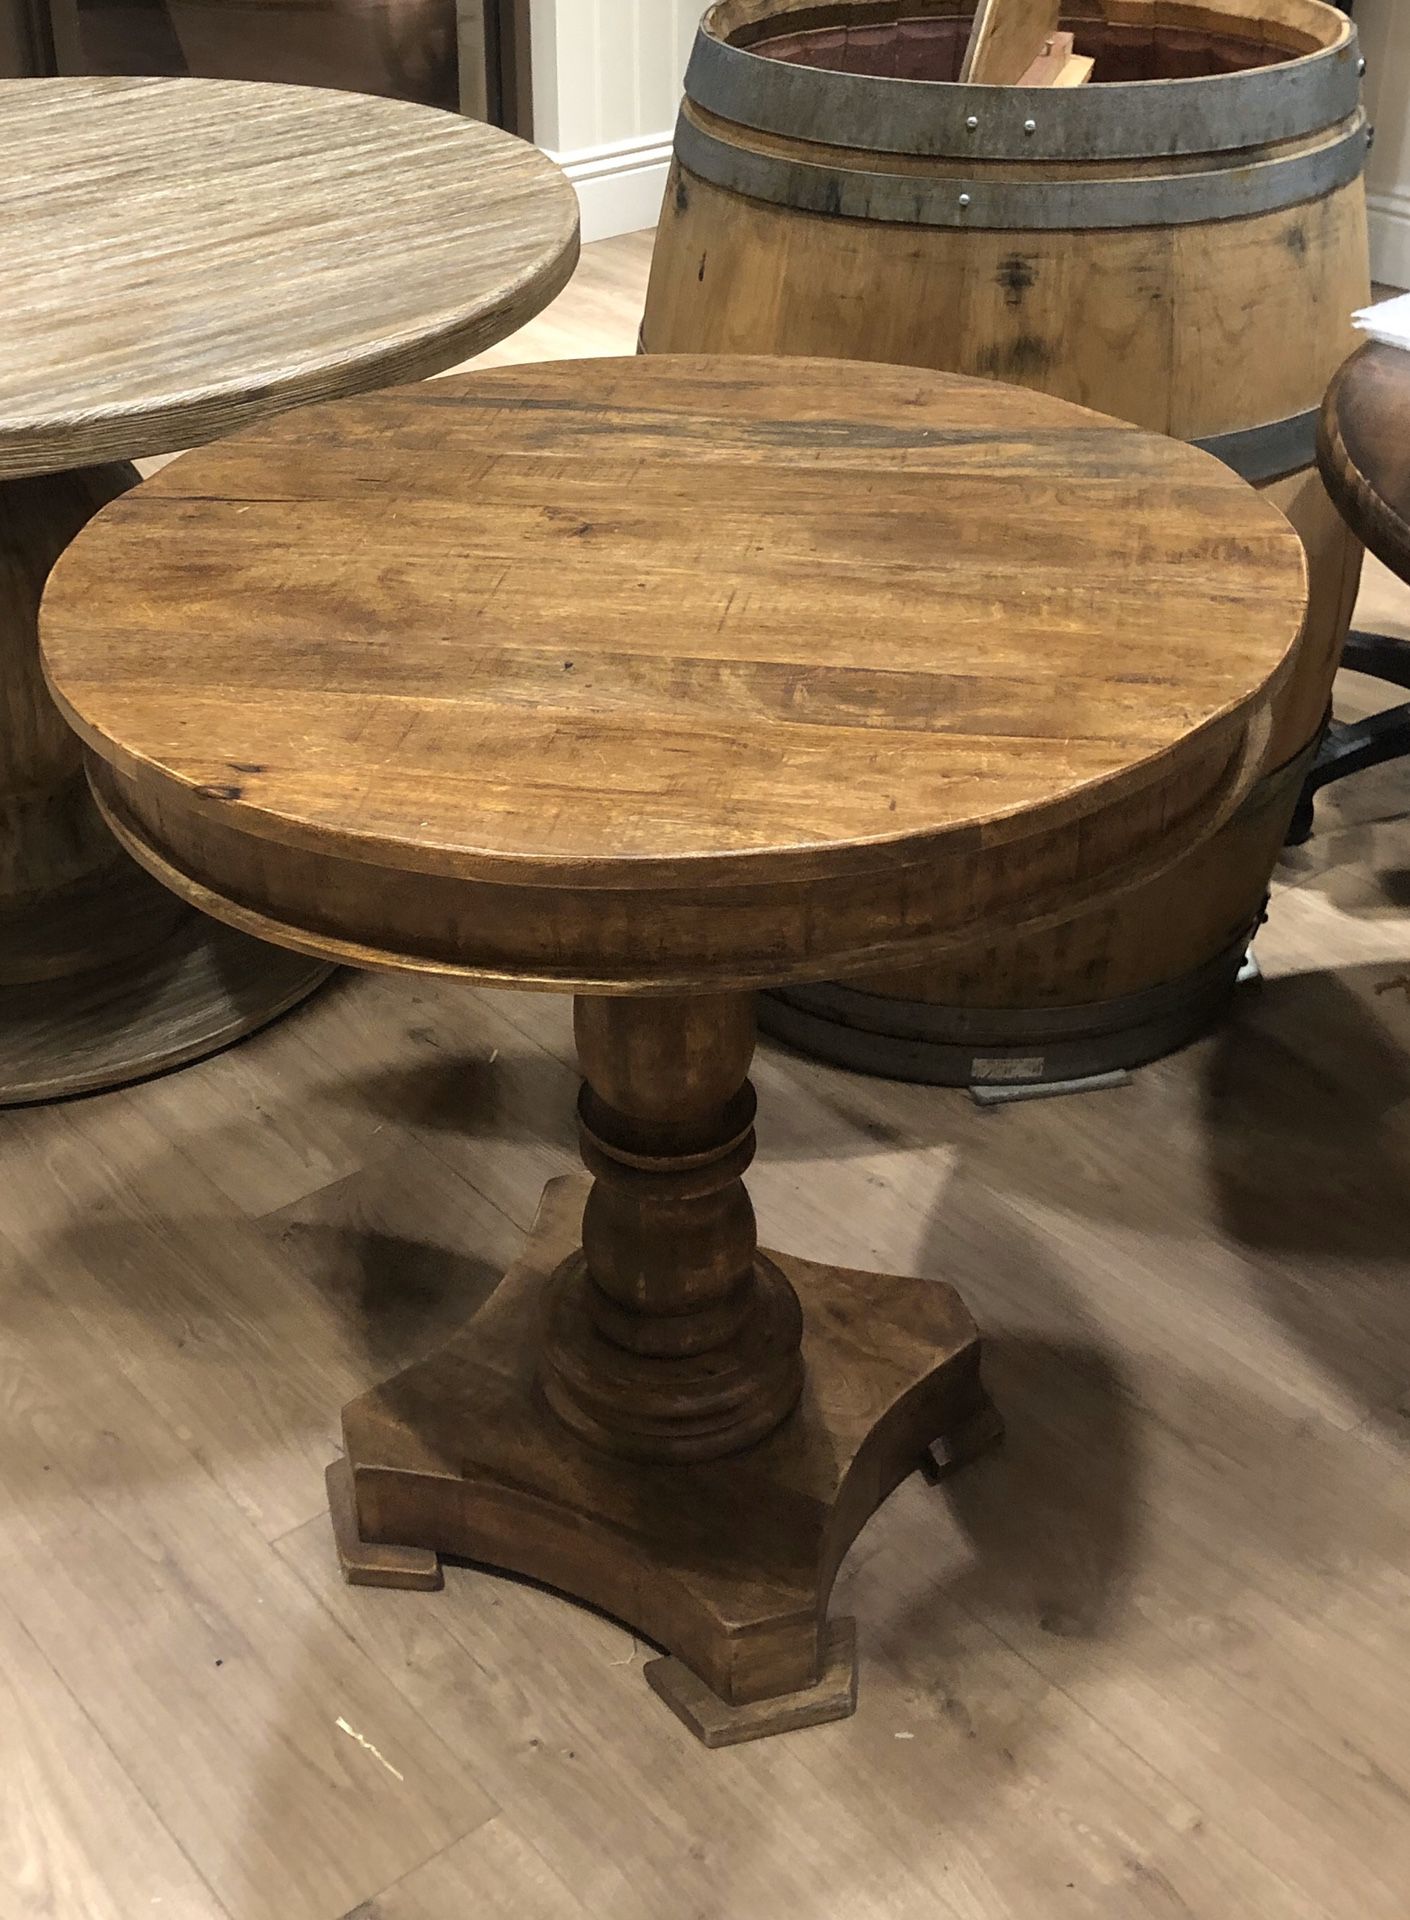 Small round dining table